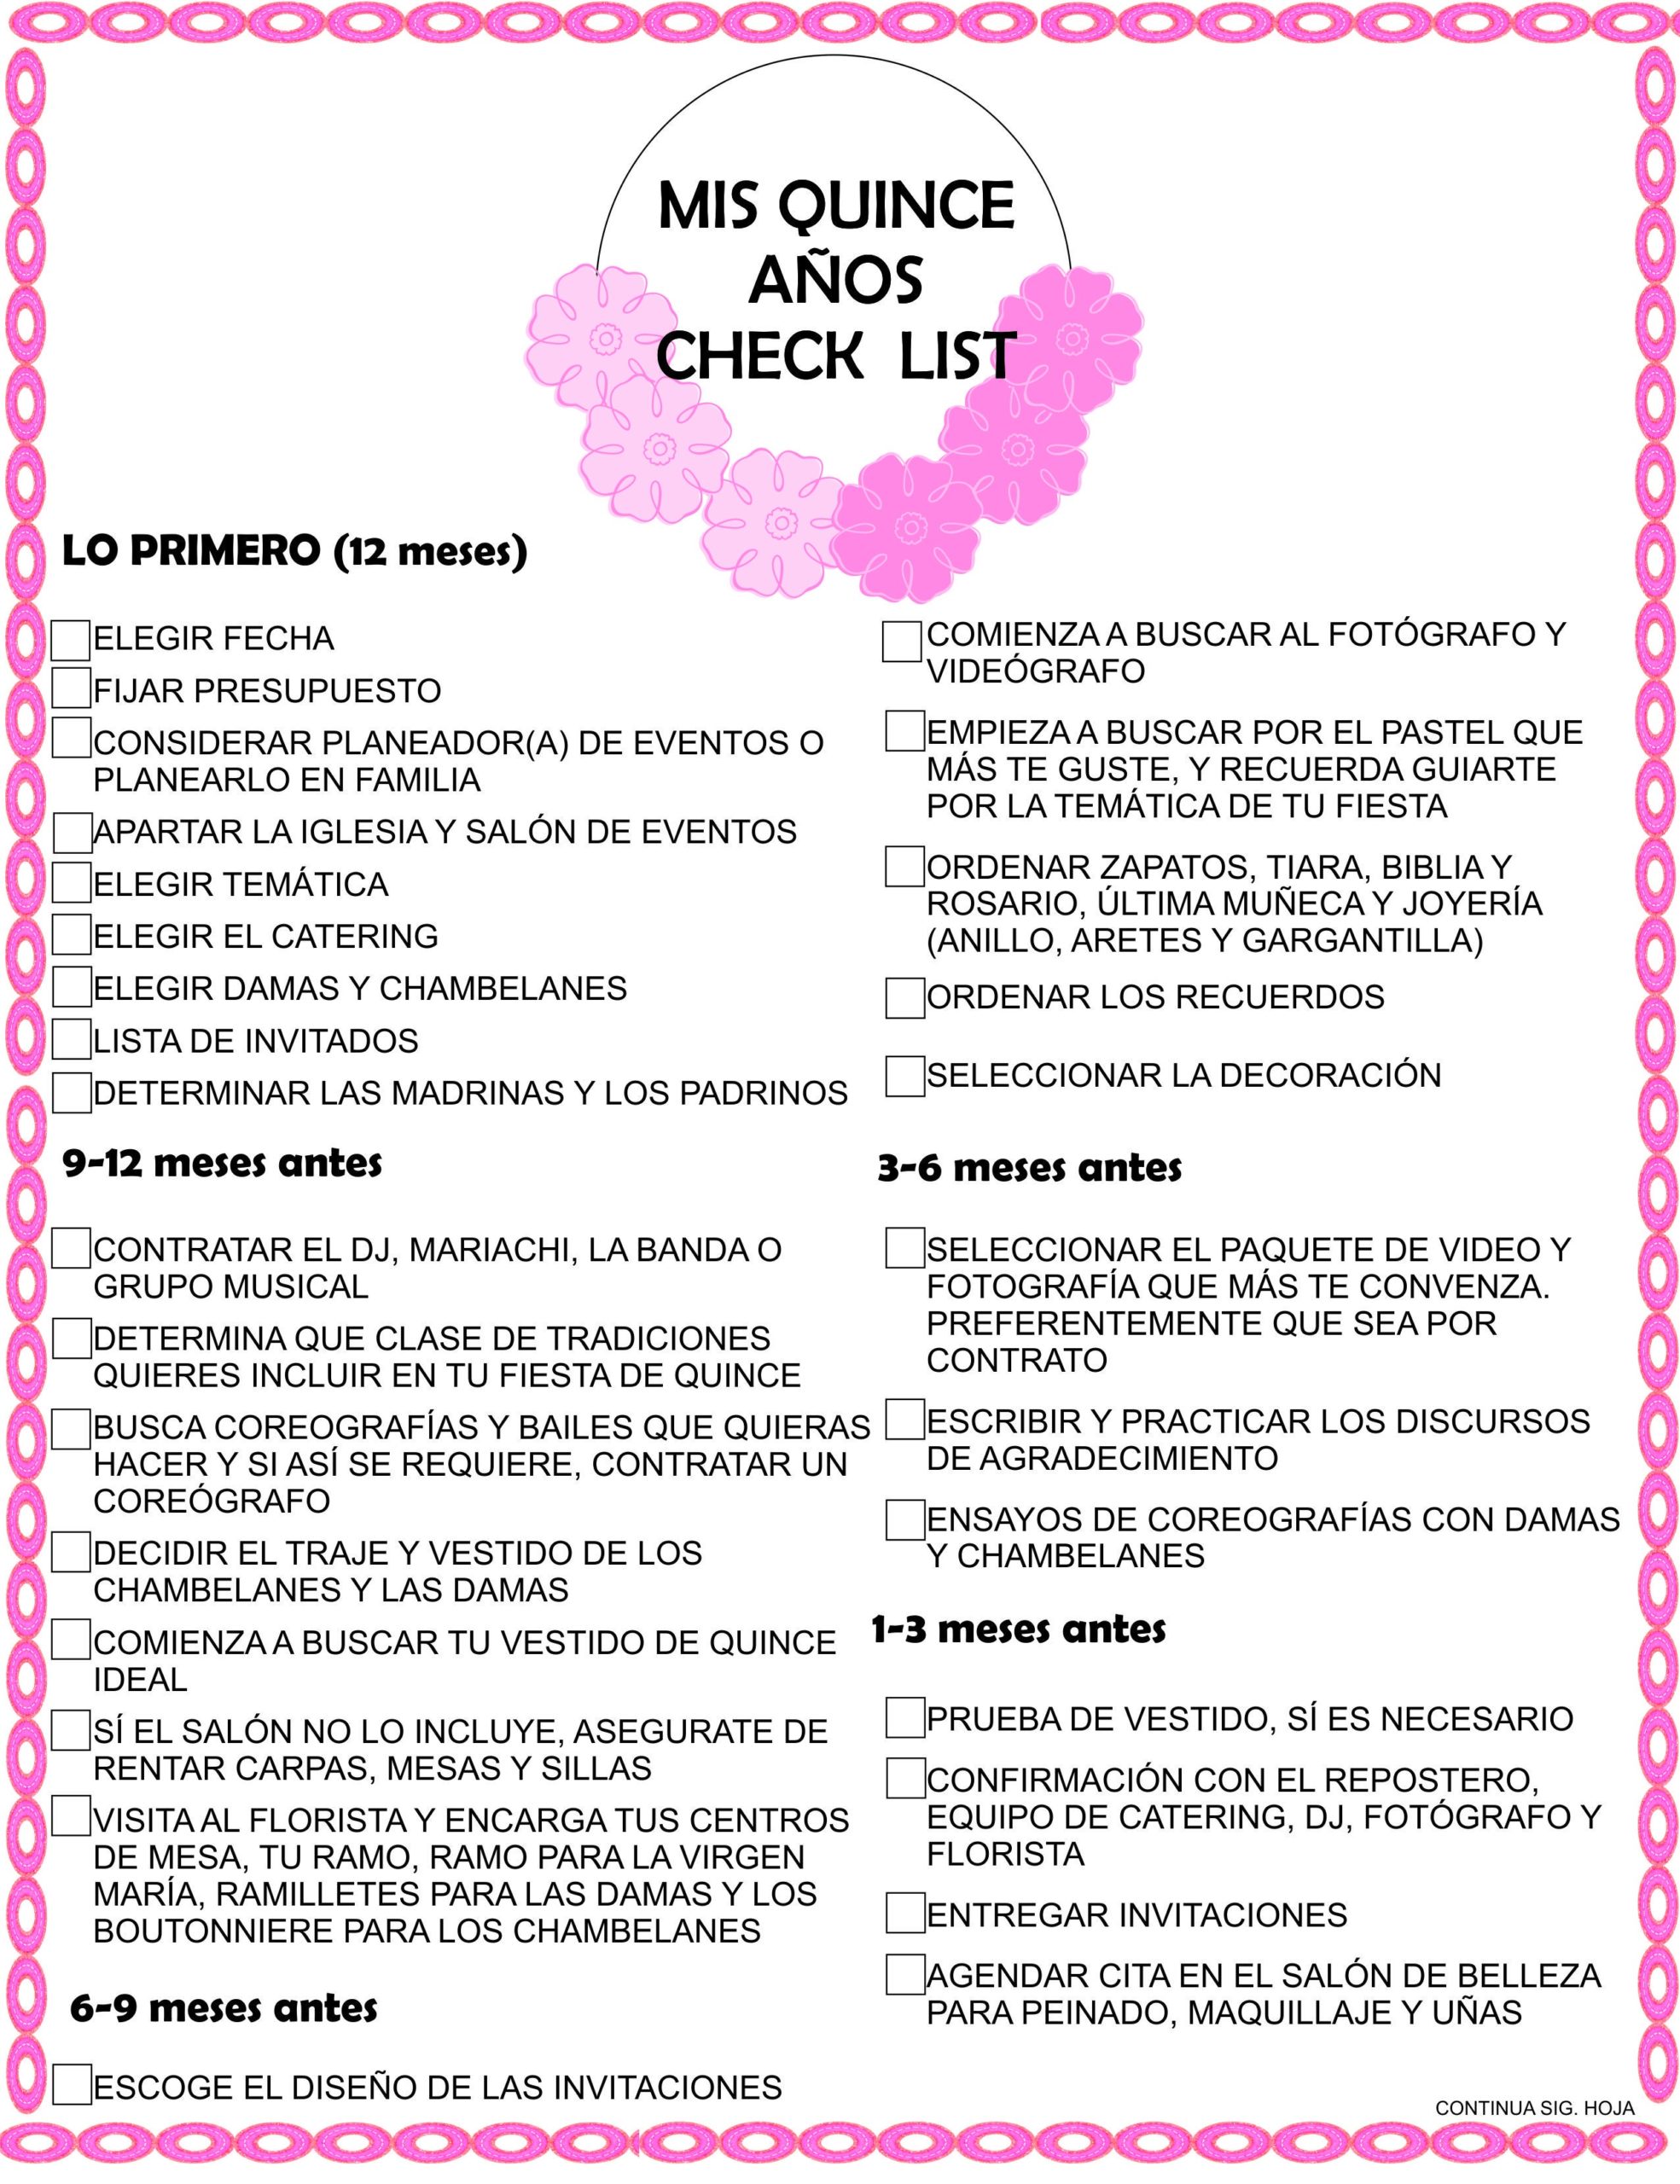 Mis Quince Anos Check List